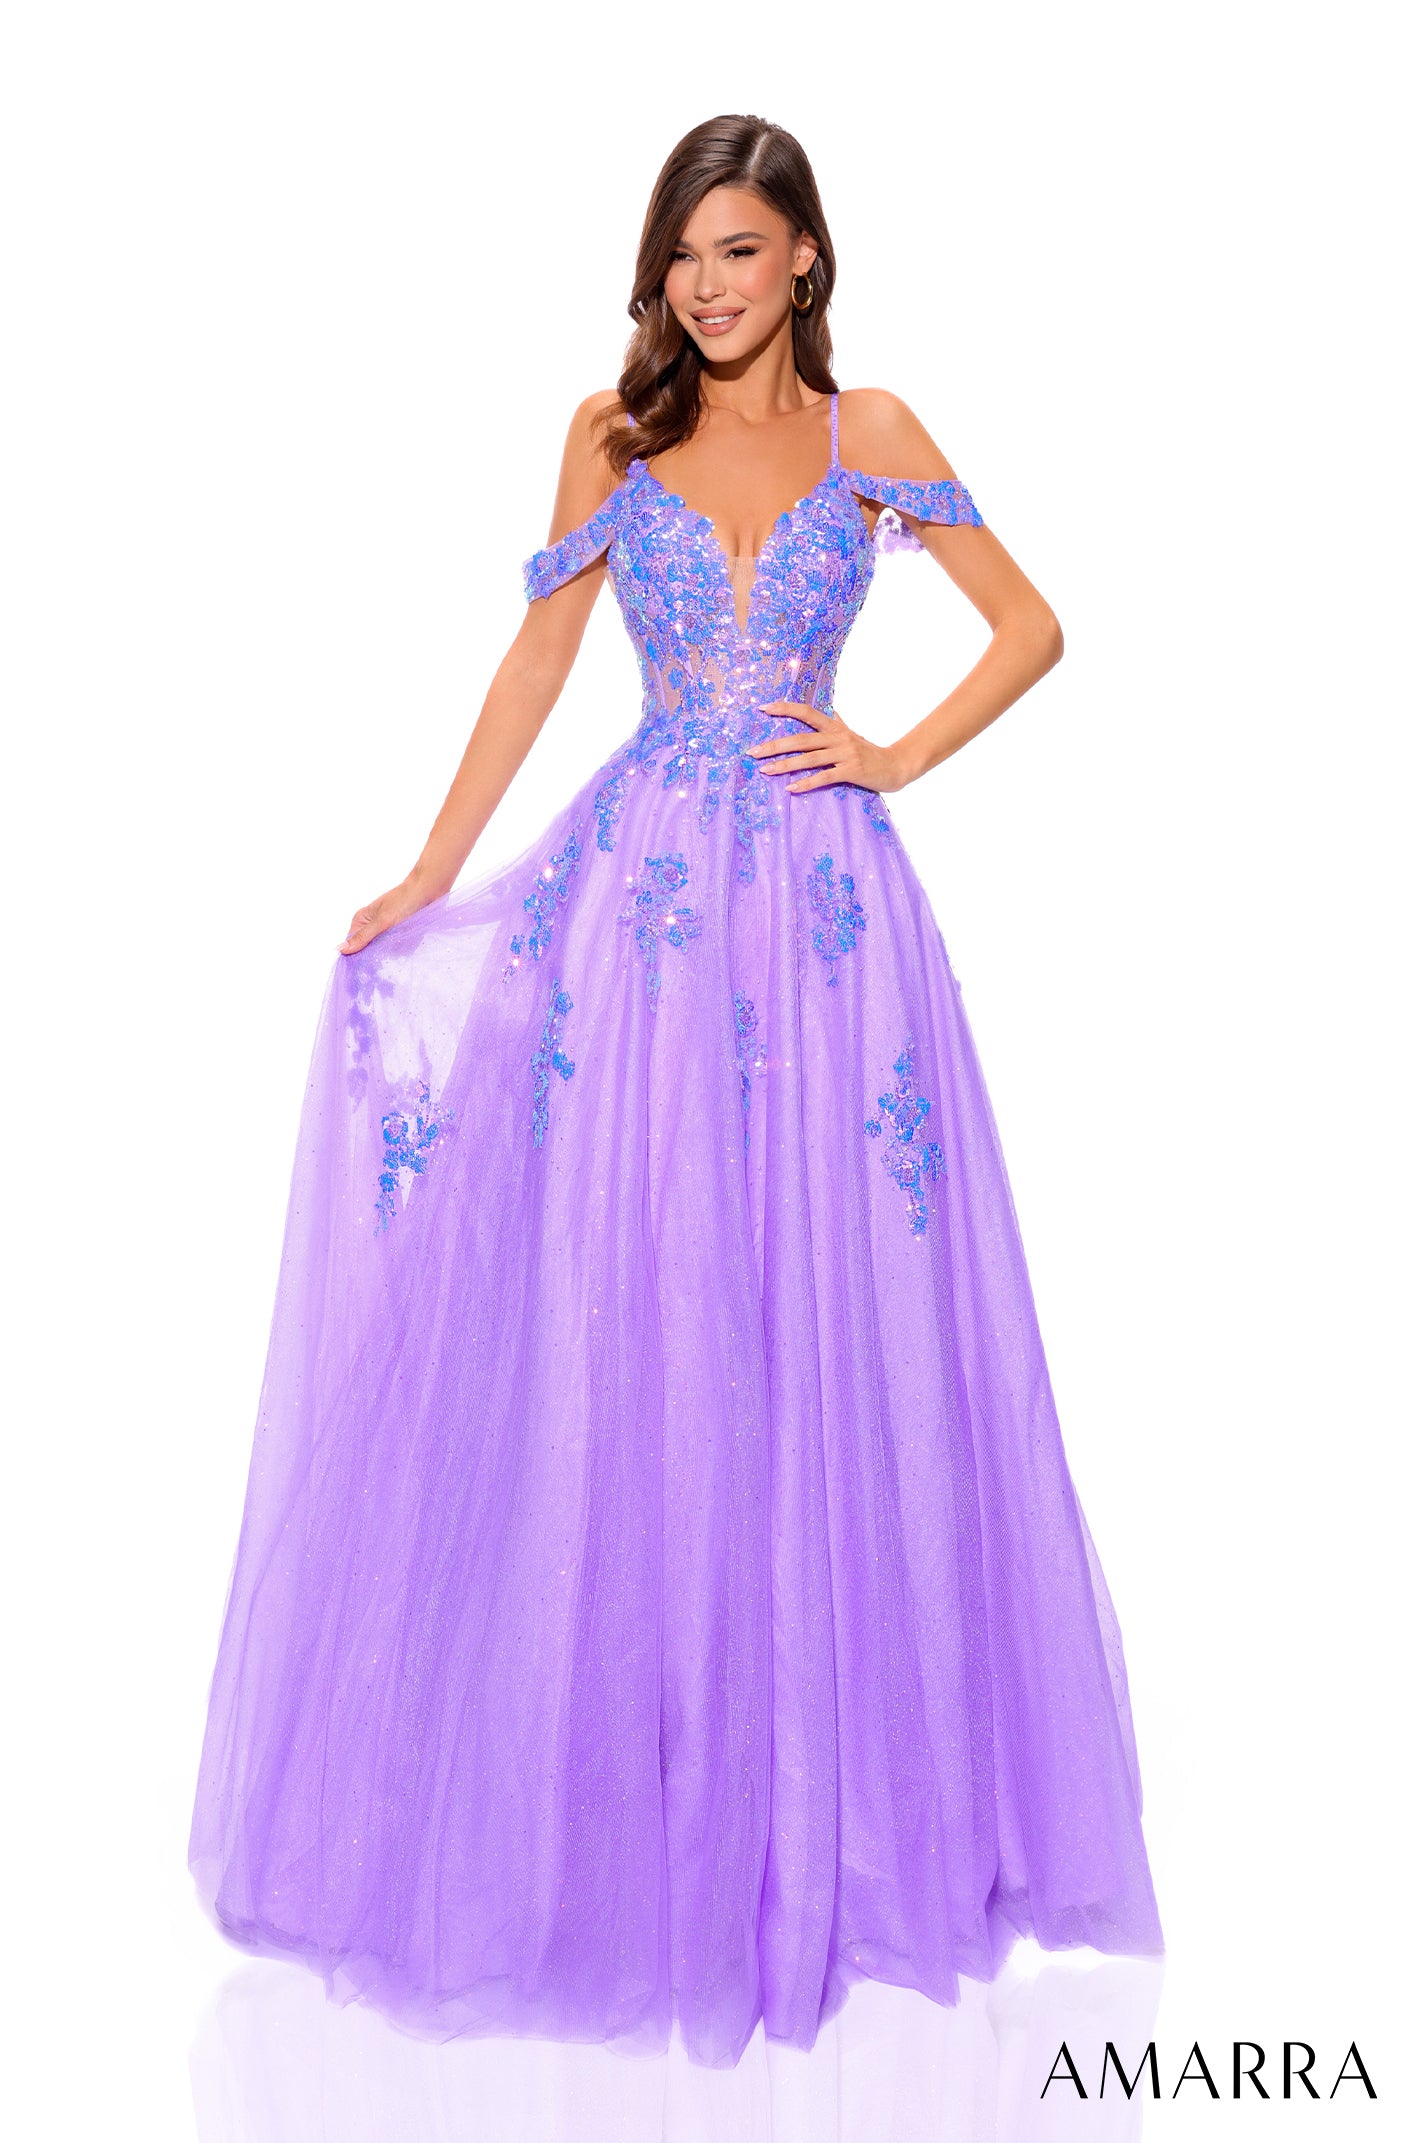 Be the center of attention in this stunning Amarra 88875 Long Shimmer Sequin Ballgown. The off the shoulder design and sheer corset add a touch of elegance, while the shimmering sequins will make you shine all night long. Perfect for prom or any special occasion. Be ready to be the talk of the town for months with this breathtaking gown.